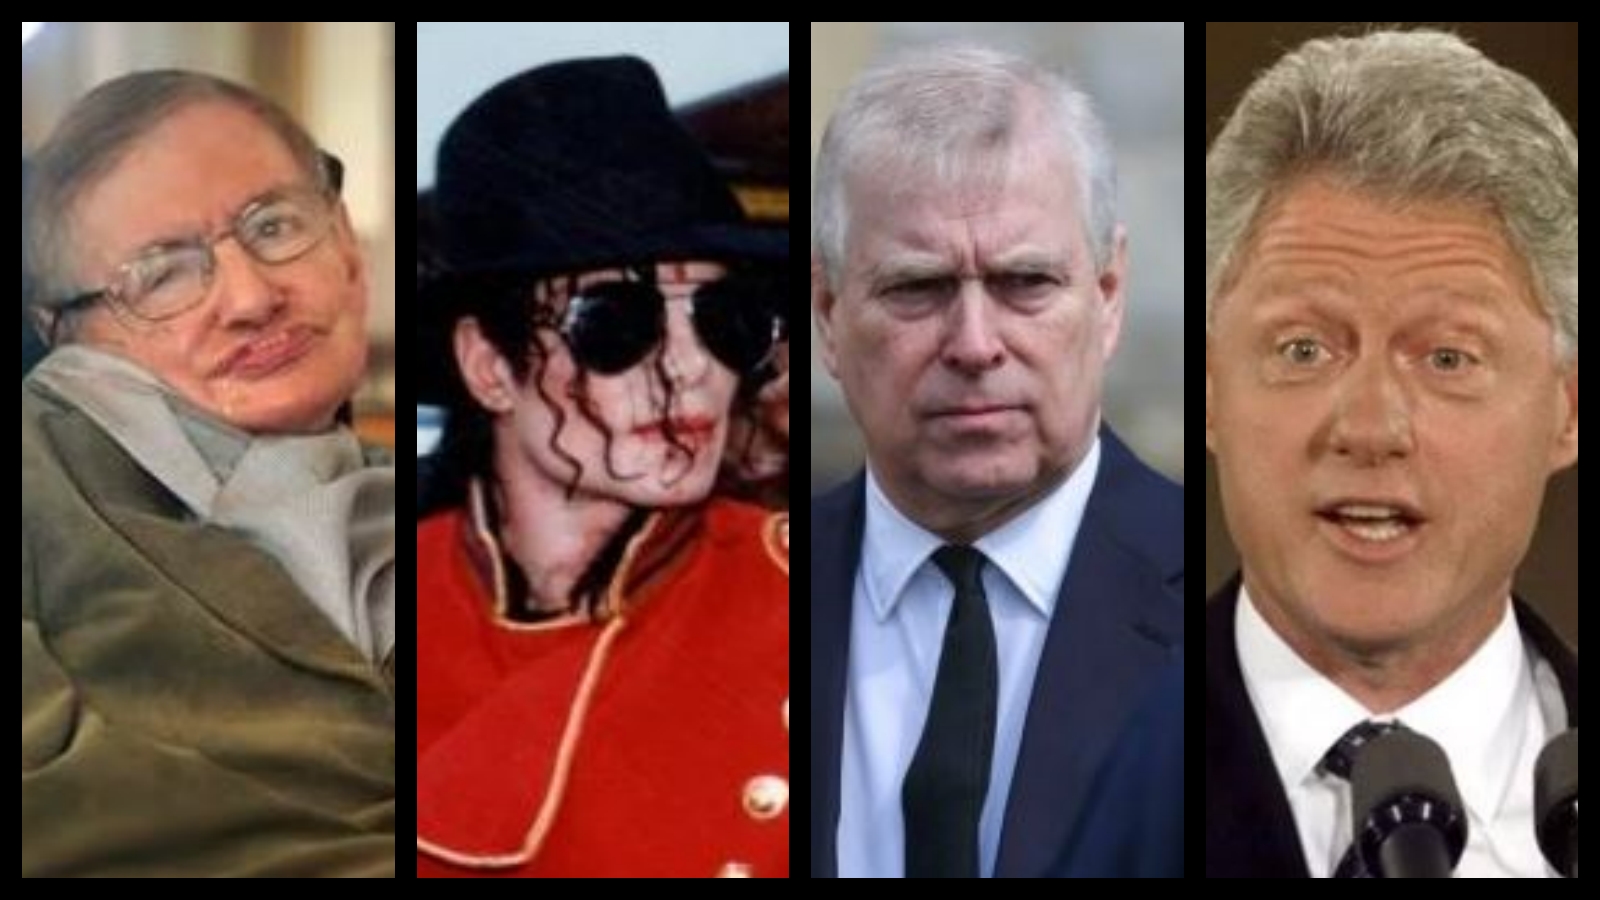 Prince Andrew, Stephen Hawking, Bill Clinton The key names on the